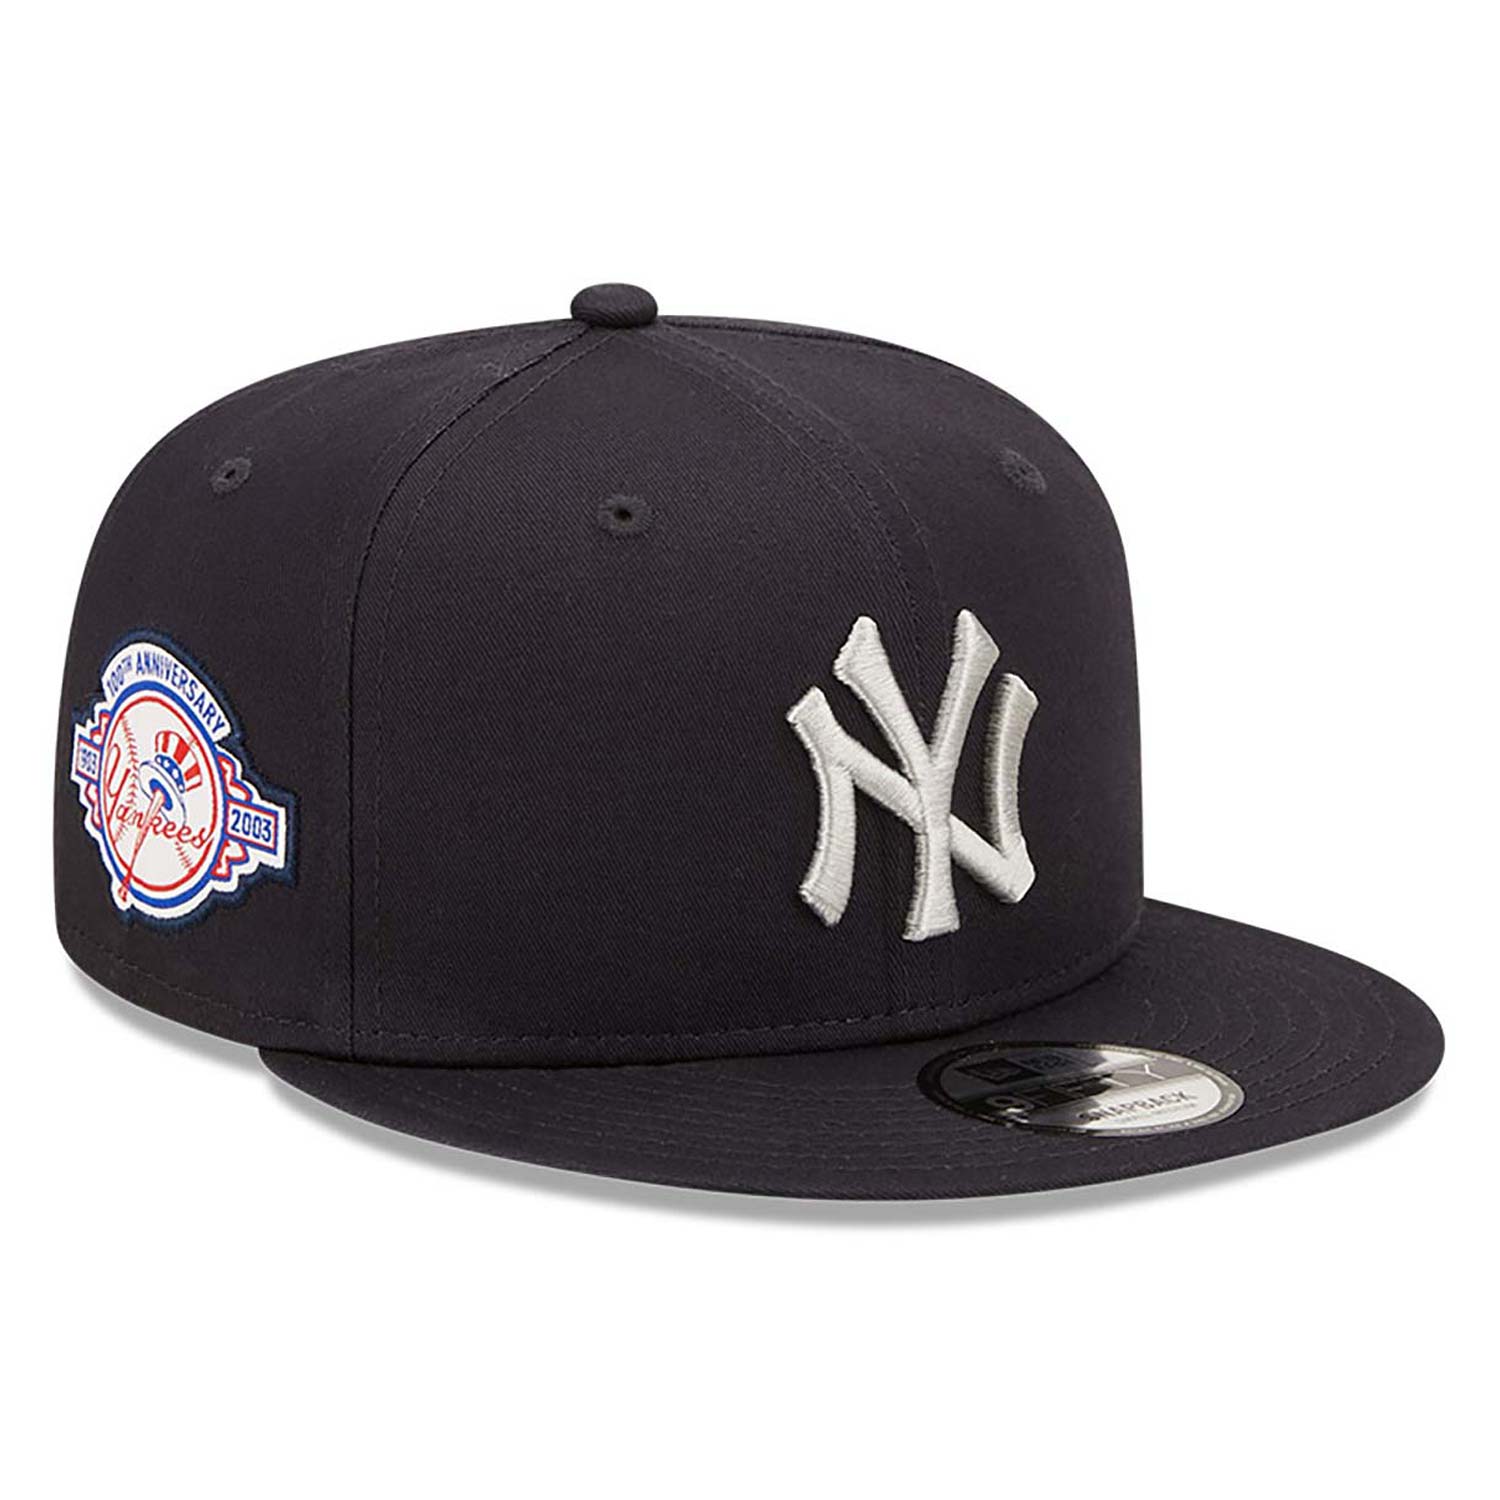 New York Yankees Team Side Patch Blue 9FIFTY Snapback Cap